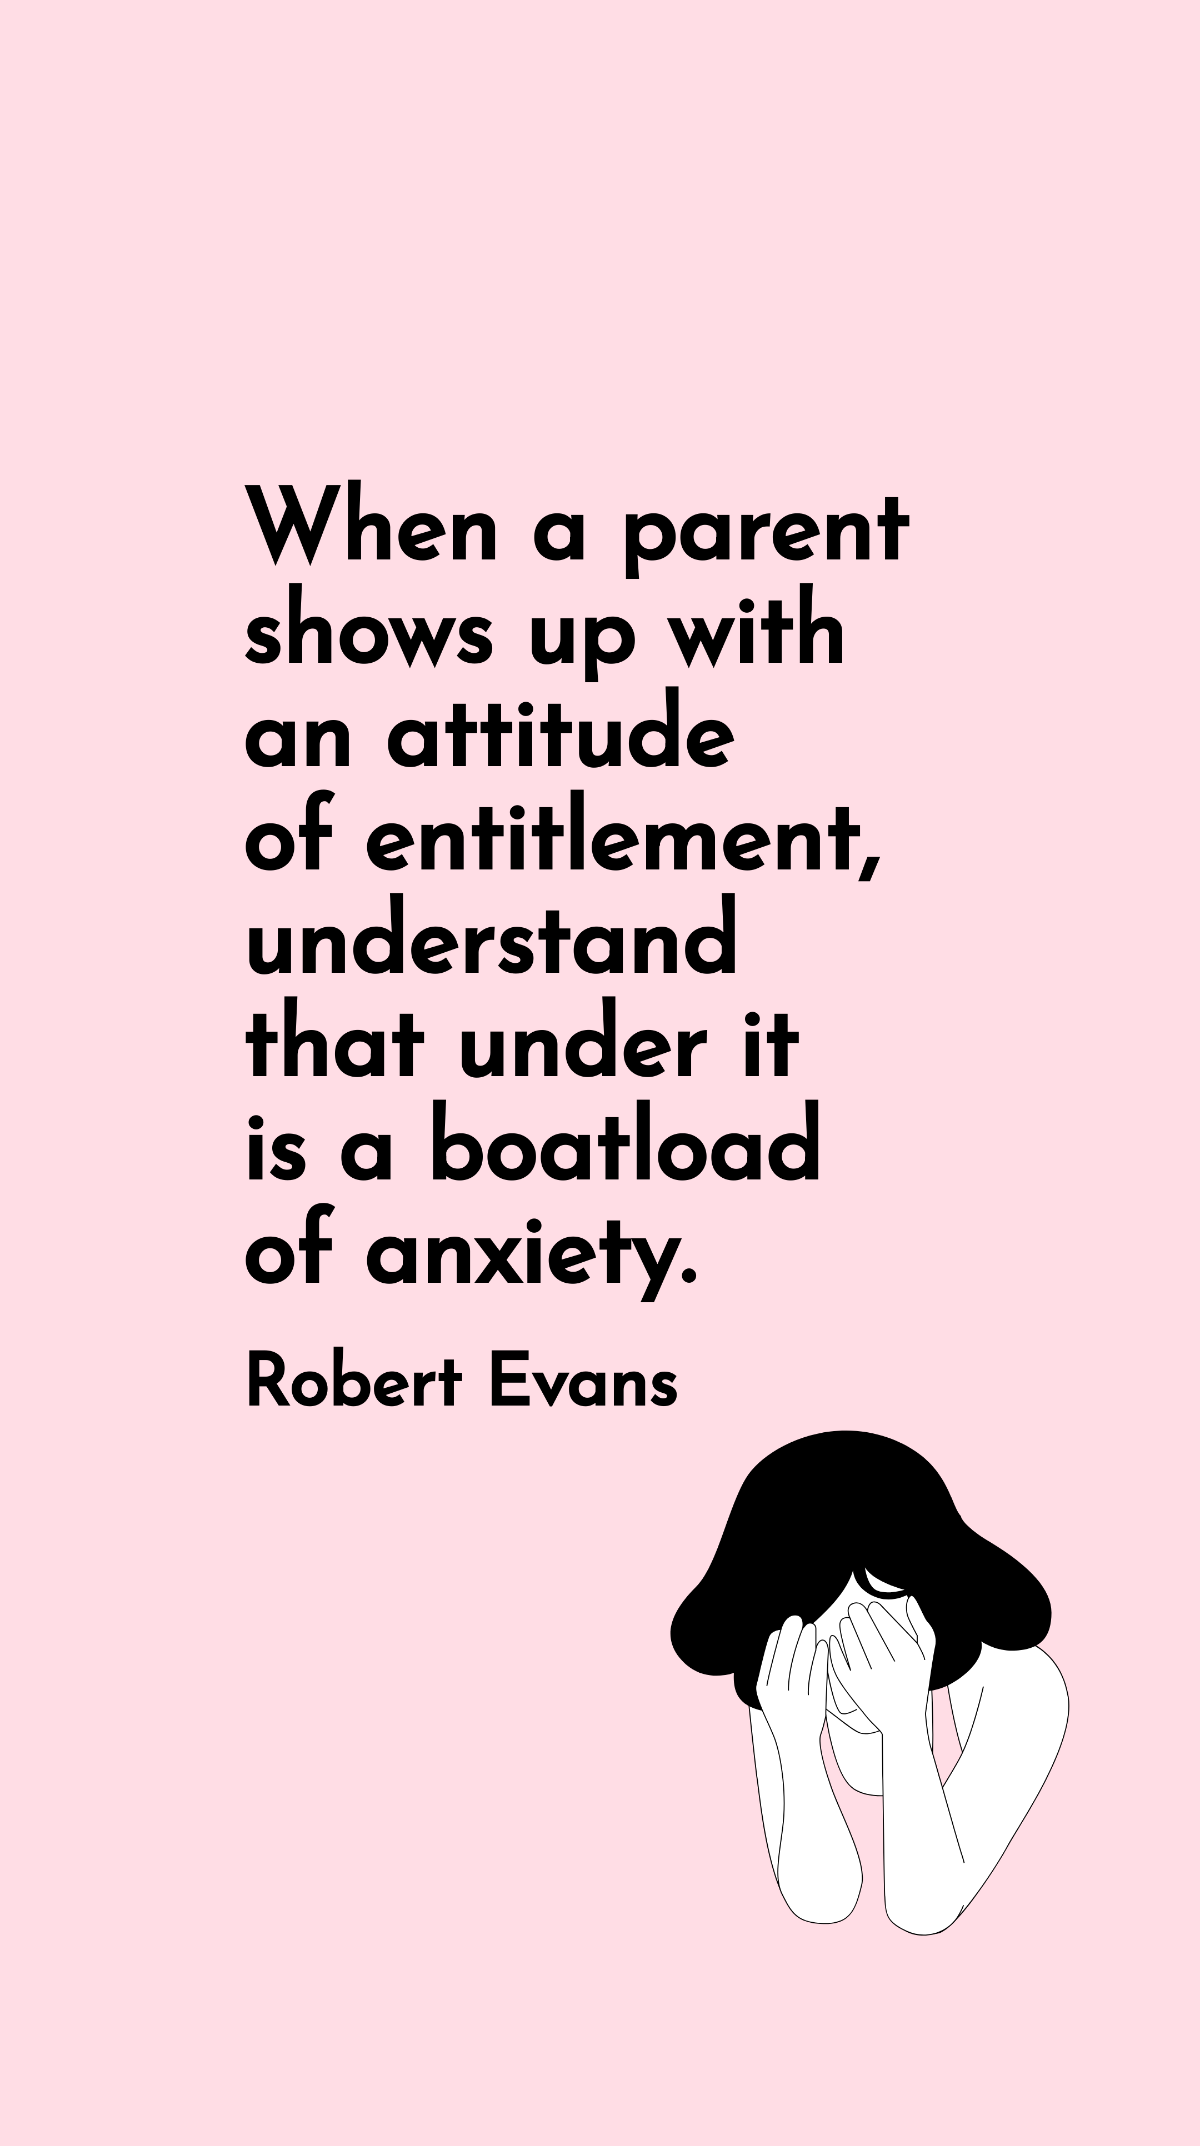 Free Robert Evans - When a parent shows up with an attitude of entitlement, understand that under it is a boatload of anxiety. Template